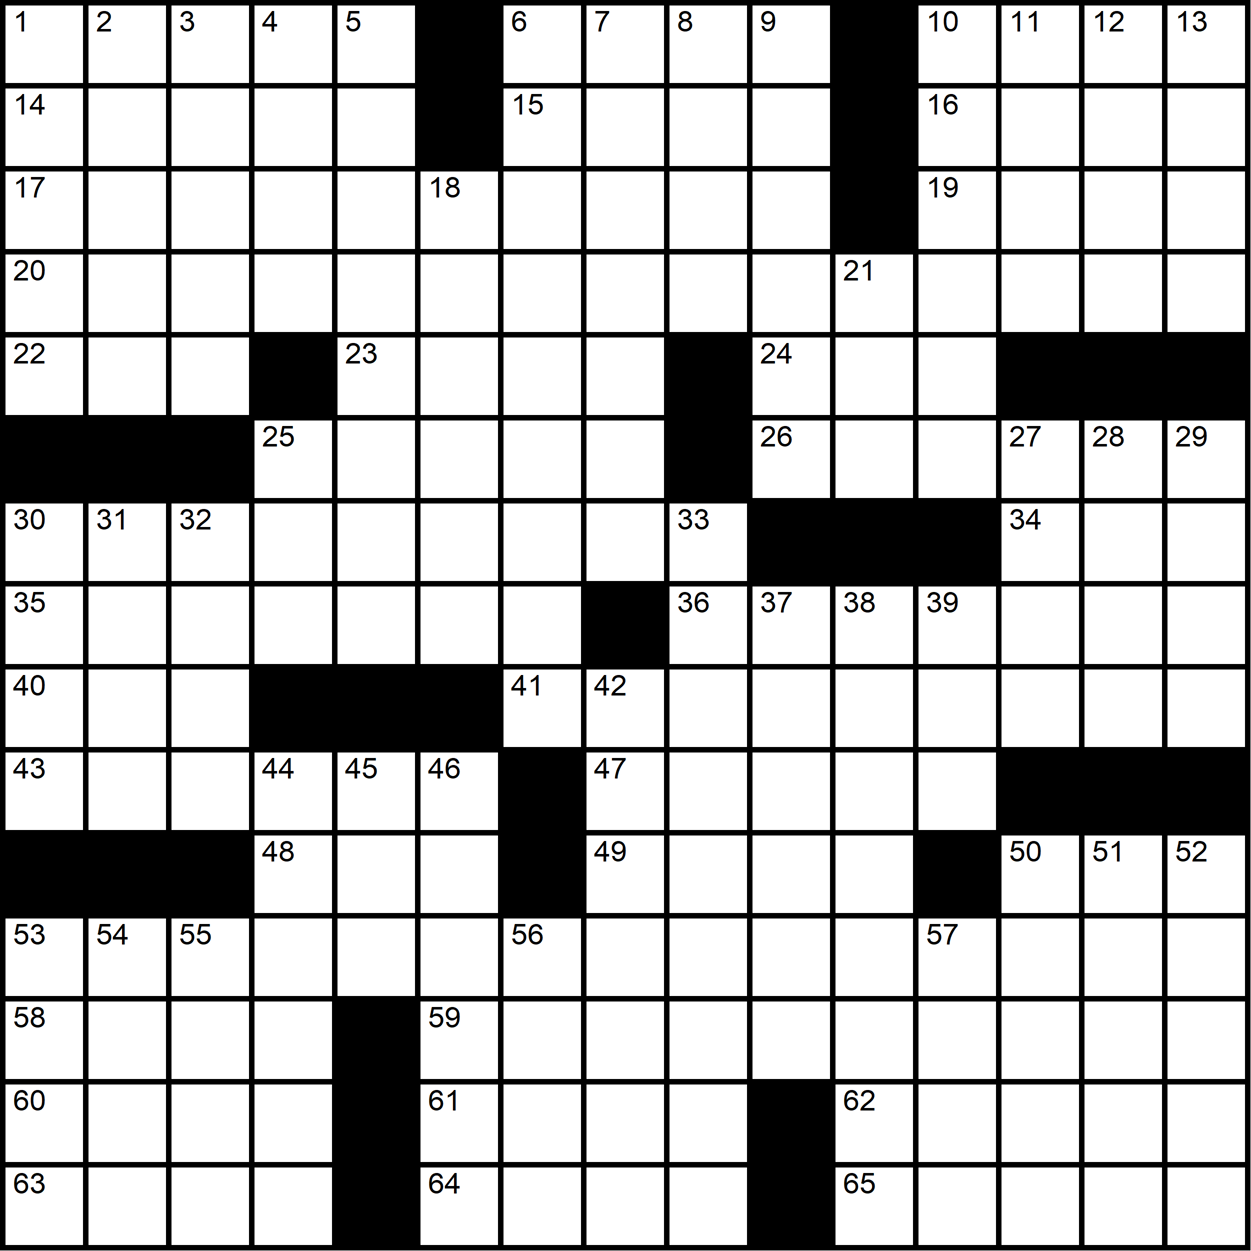 A wide-open crossword grid with standard rotational symmetry.